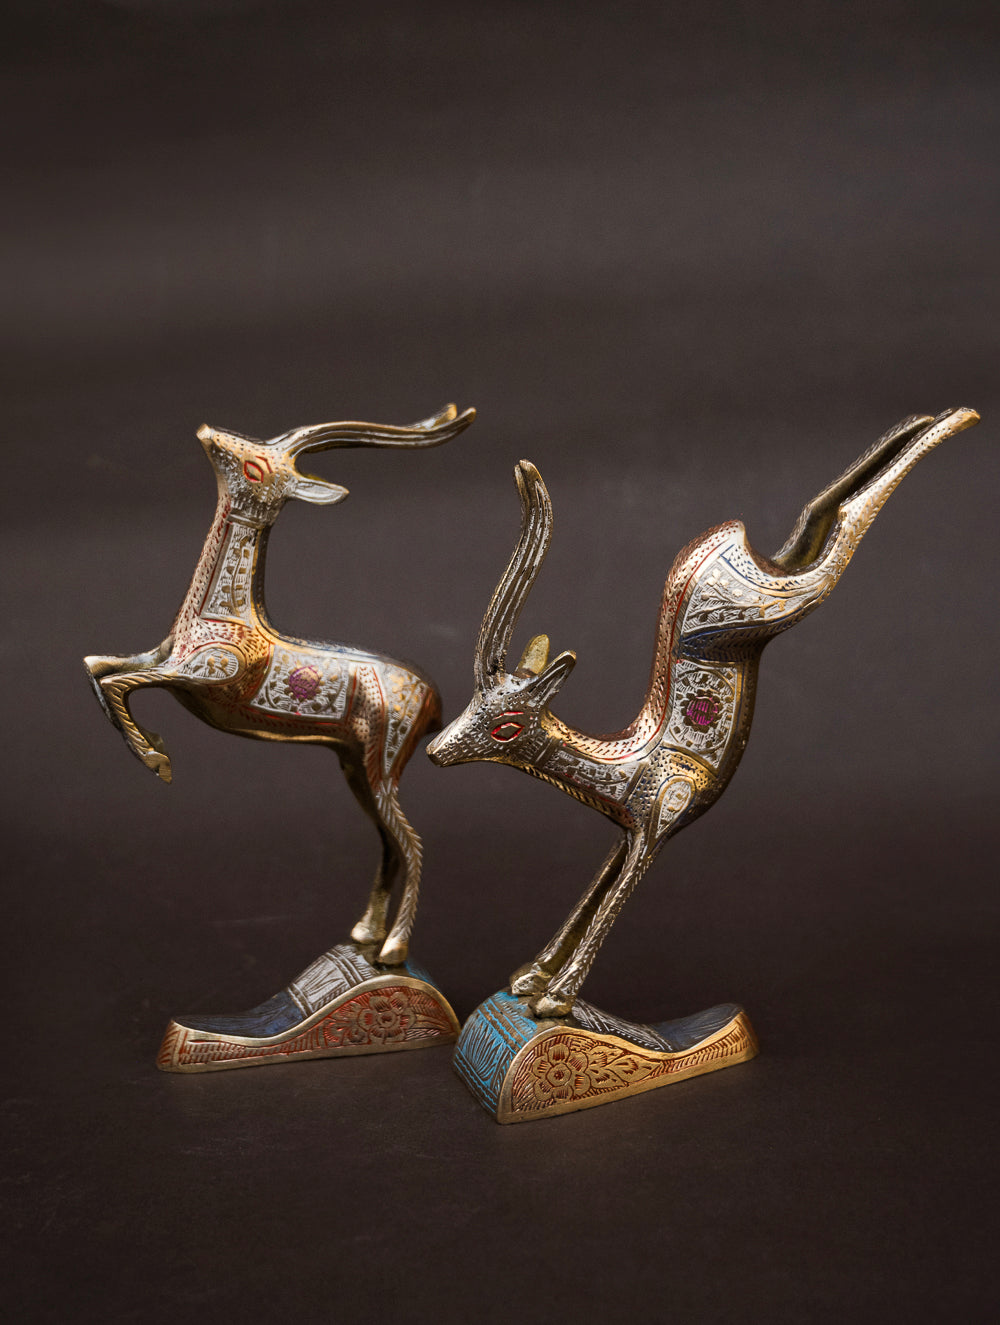 Load image into Gallery viewer, Brass Deer Curio